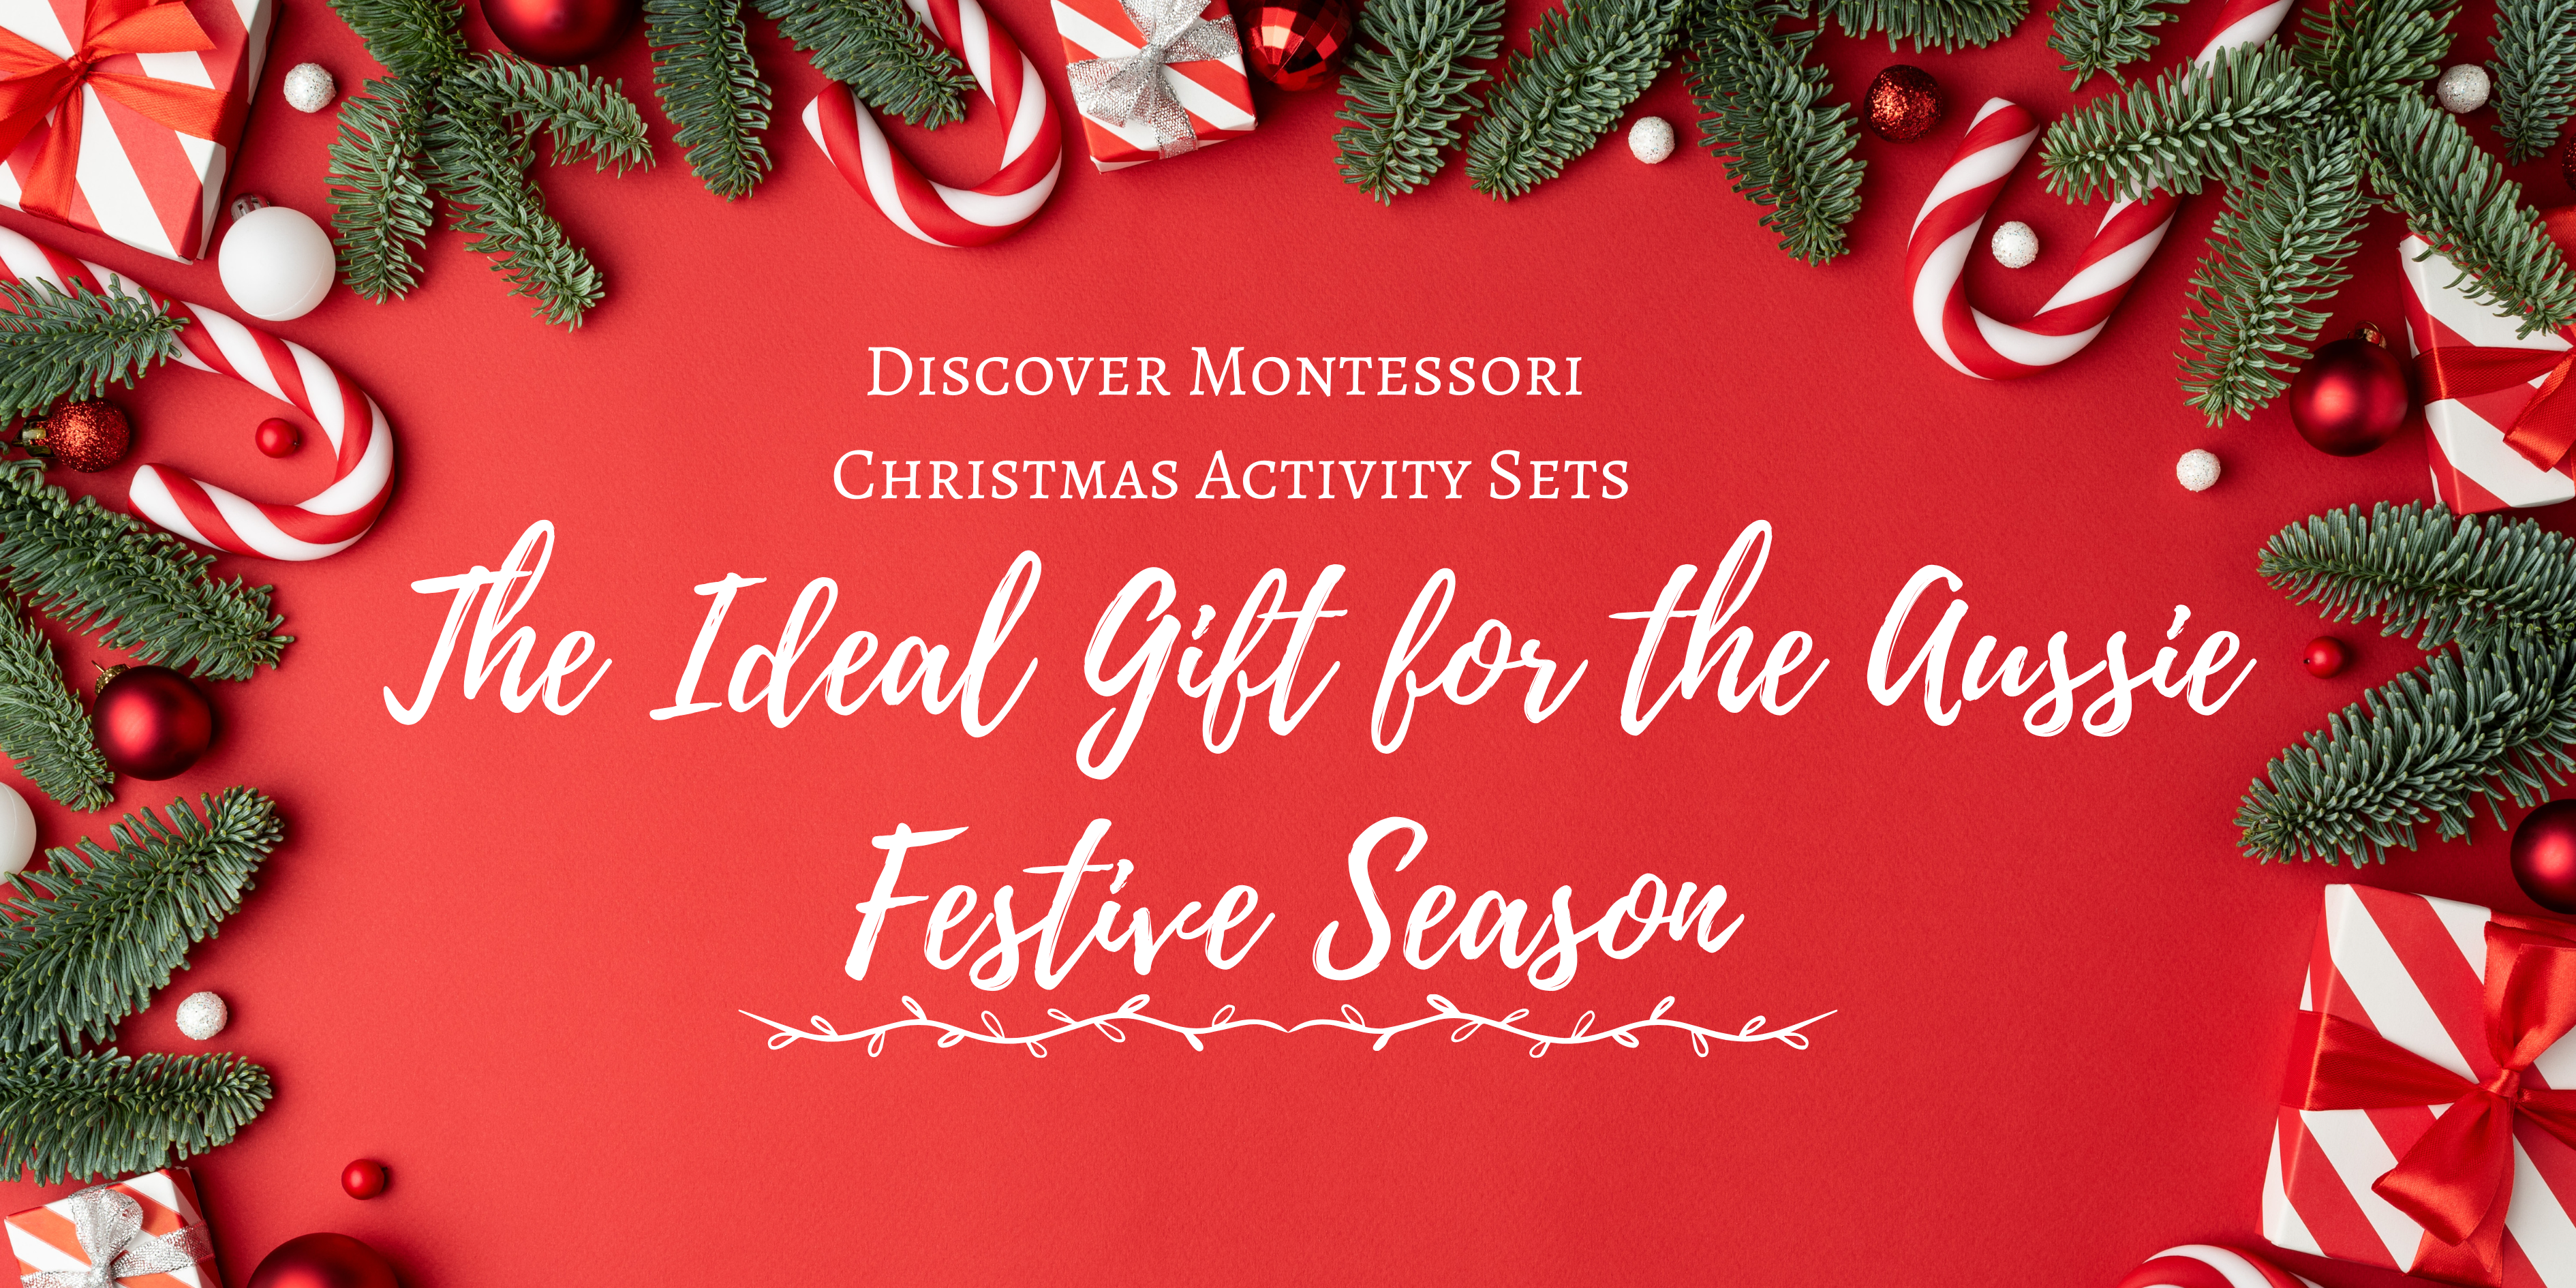 Montessori Christmas Activity Sets: The Perfect Gift for the Aussie Festive Season